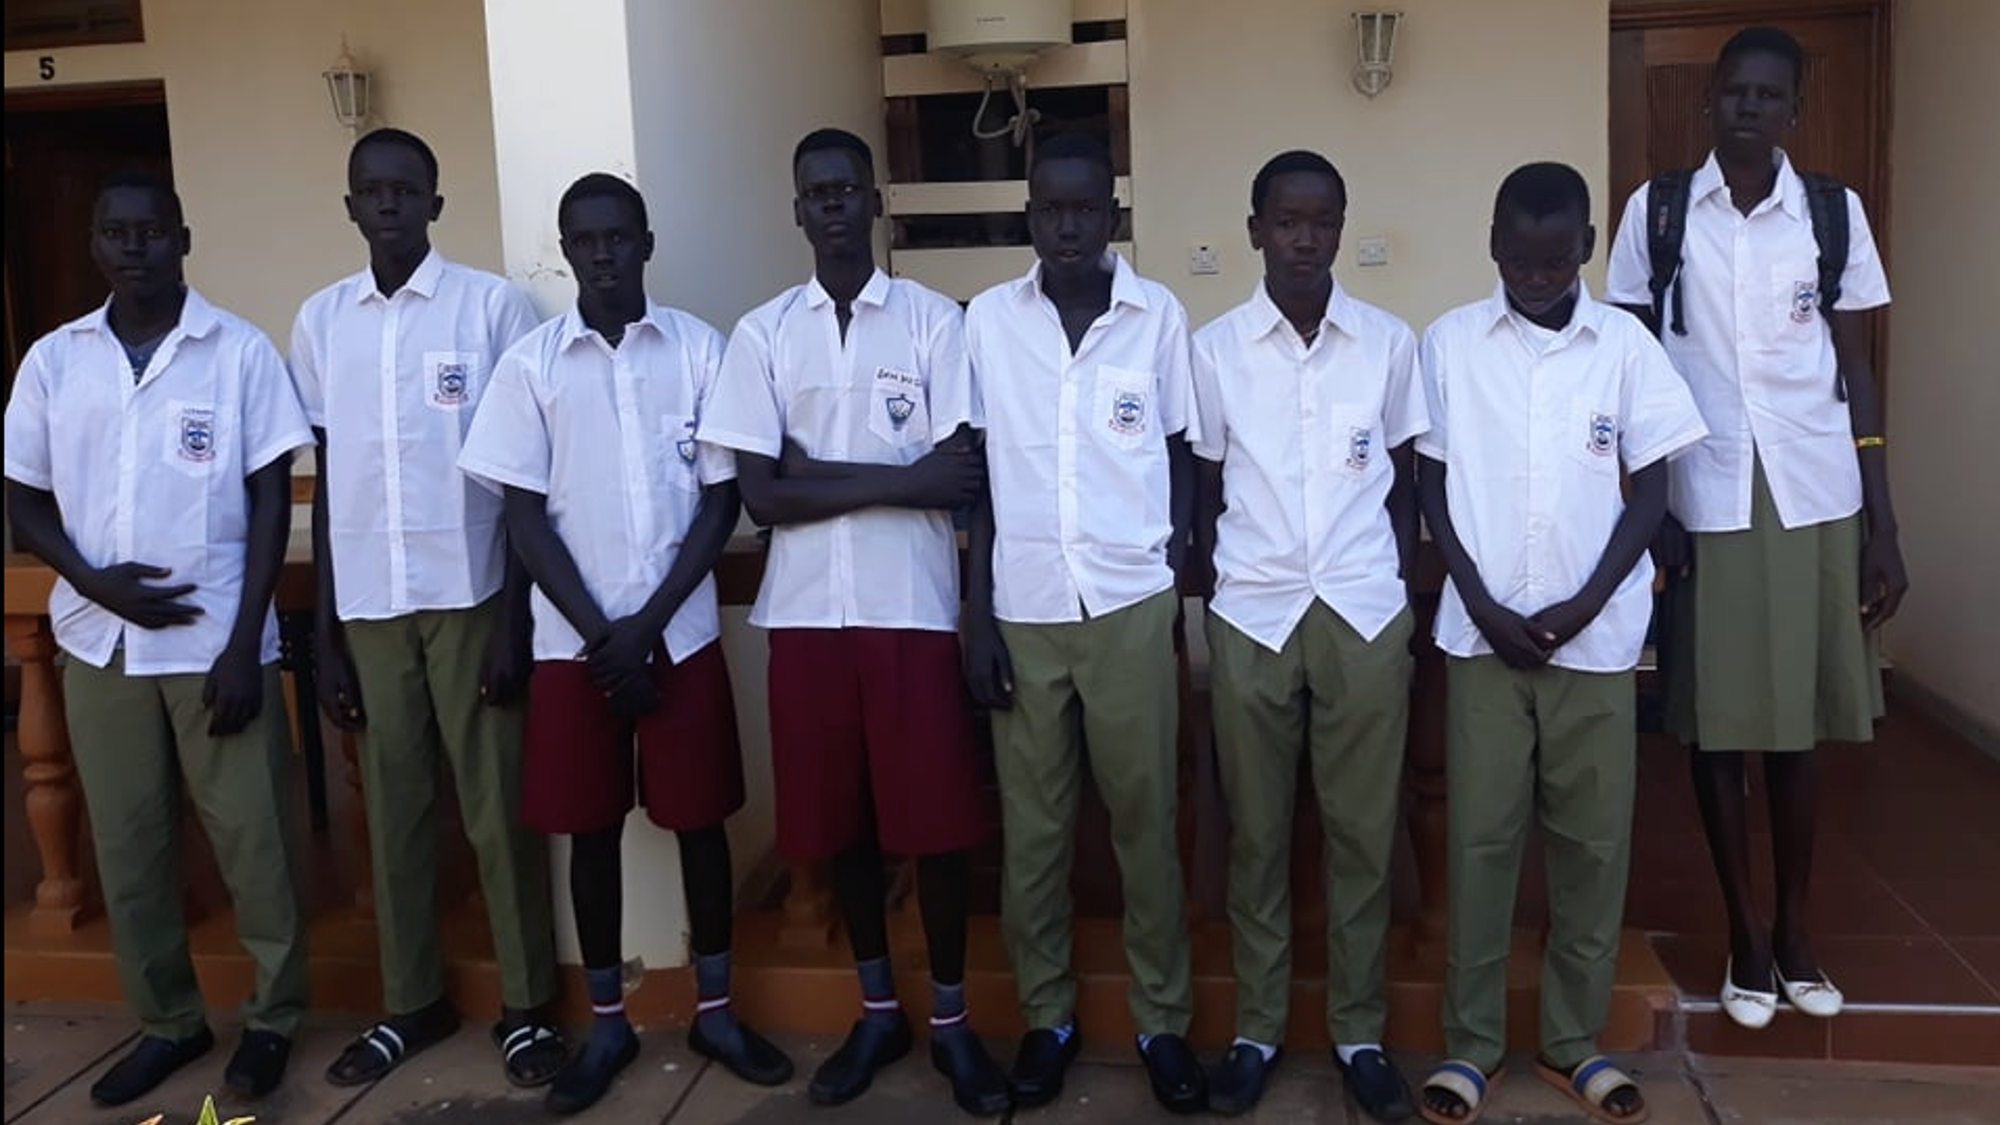 South Sudanese refugee students in Uganda are receiving help from Ms Adau in Australia.